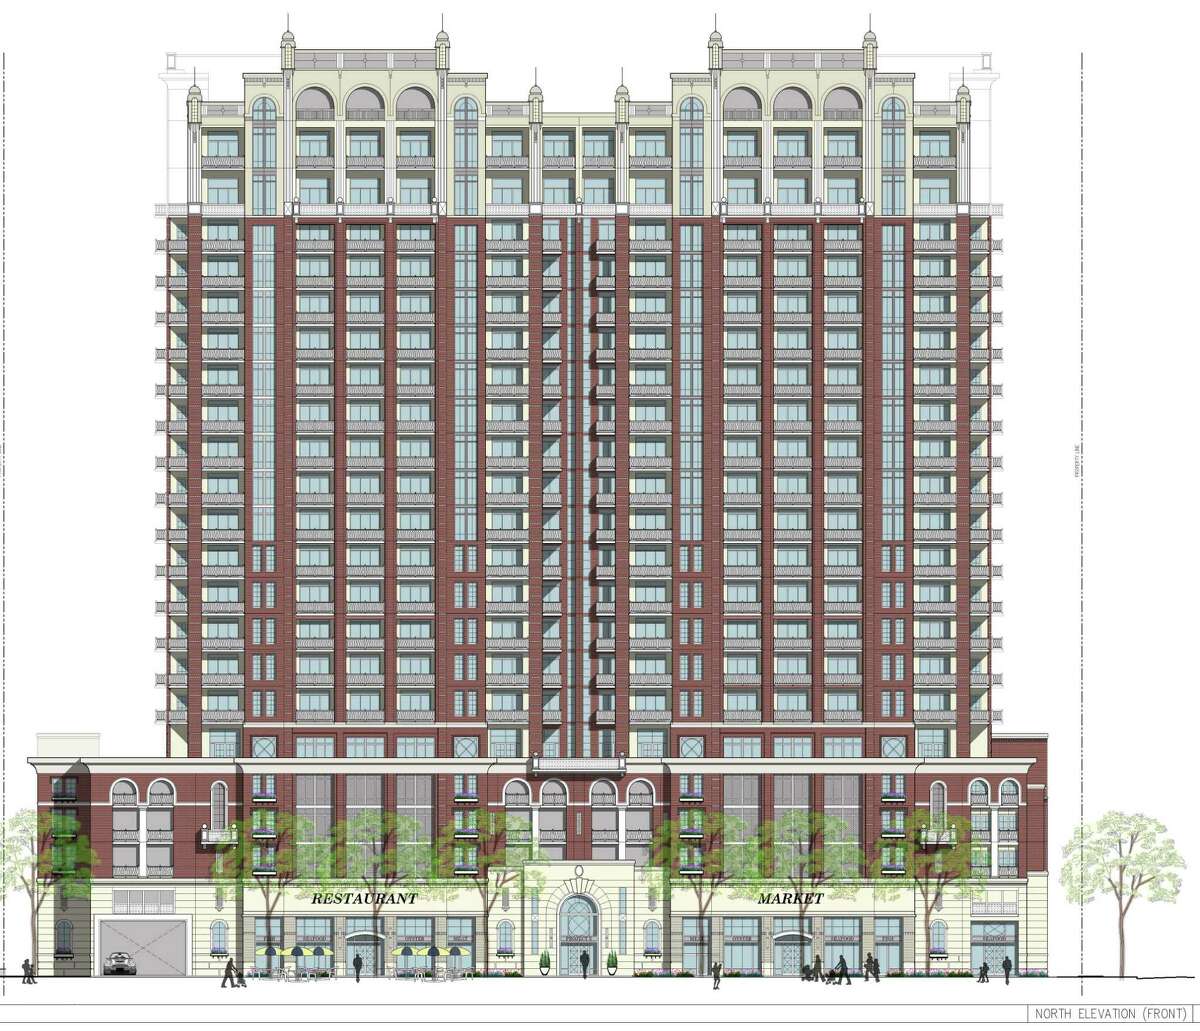 The size of the 1717 Bissonnet apartment project, commonly known as the Ashby high-rise, has led many in the area to oppose its construction.